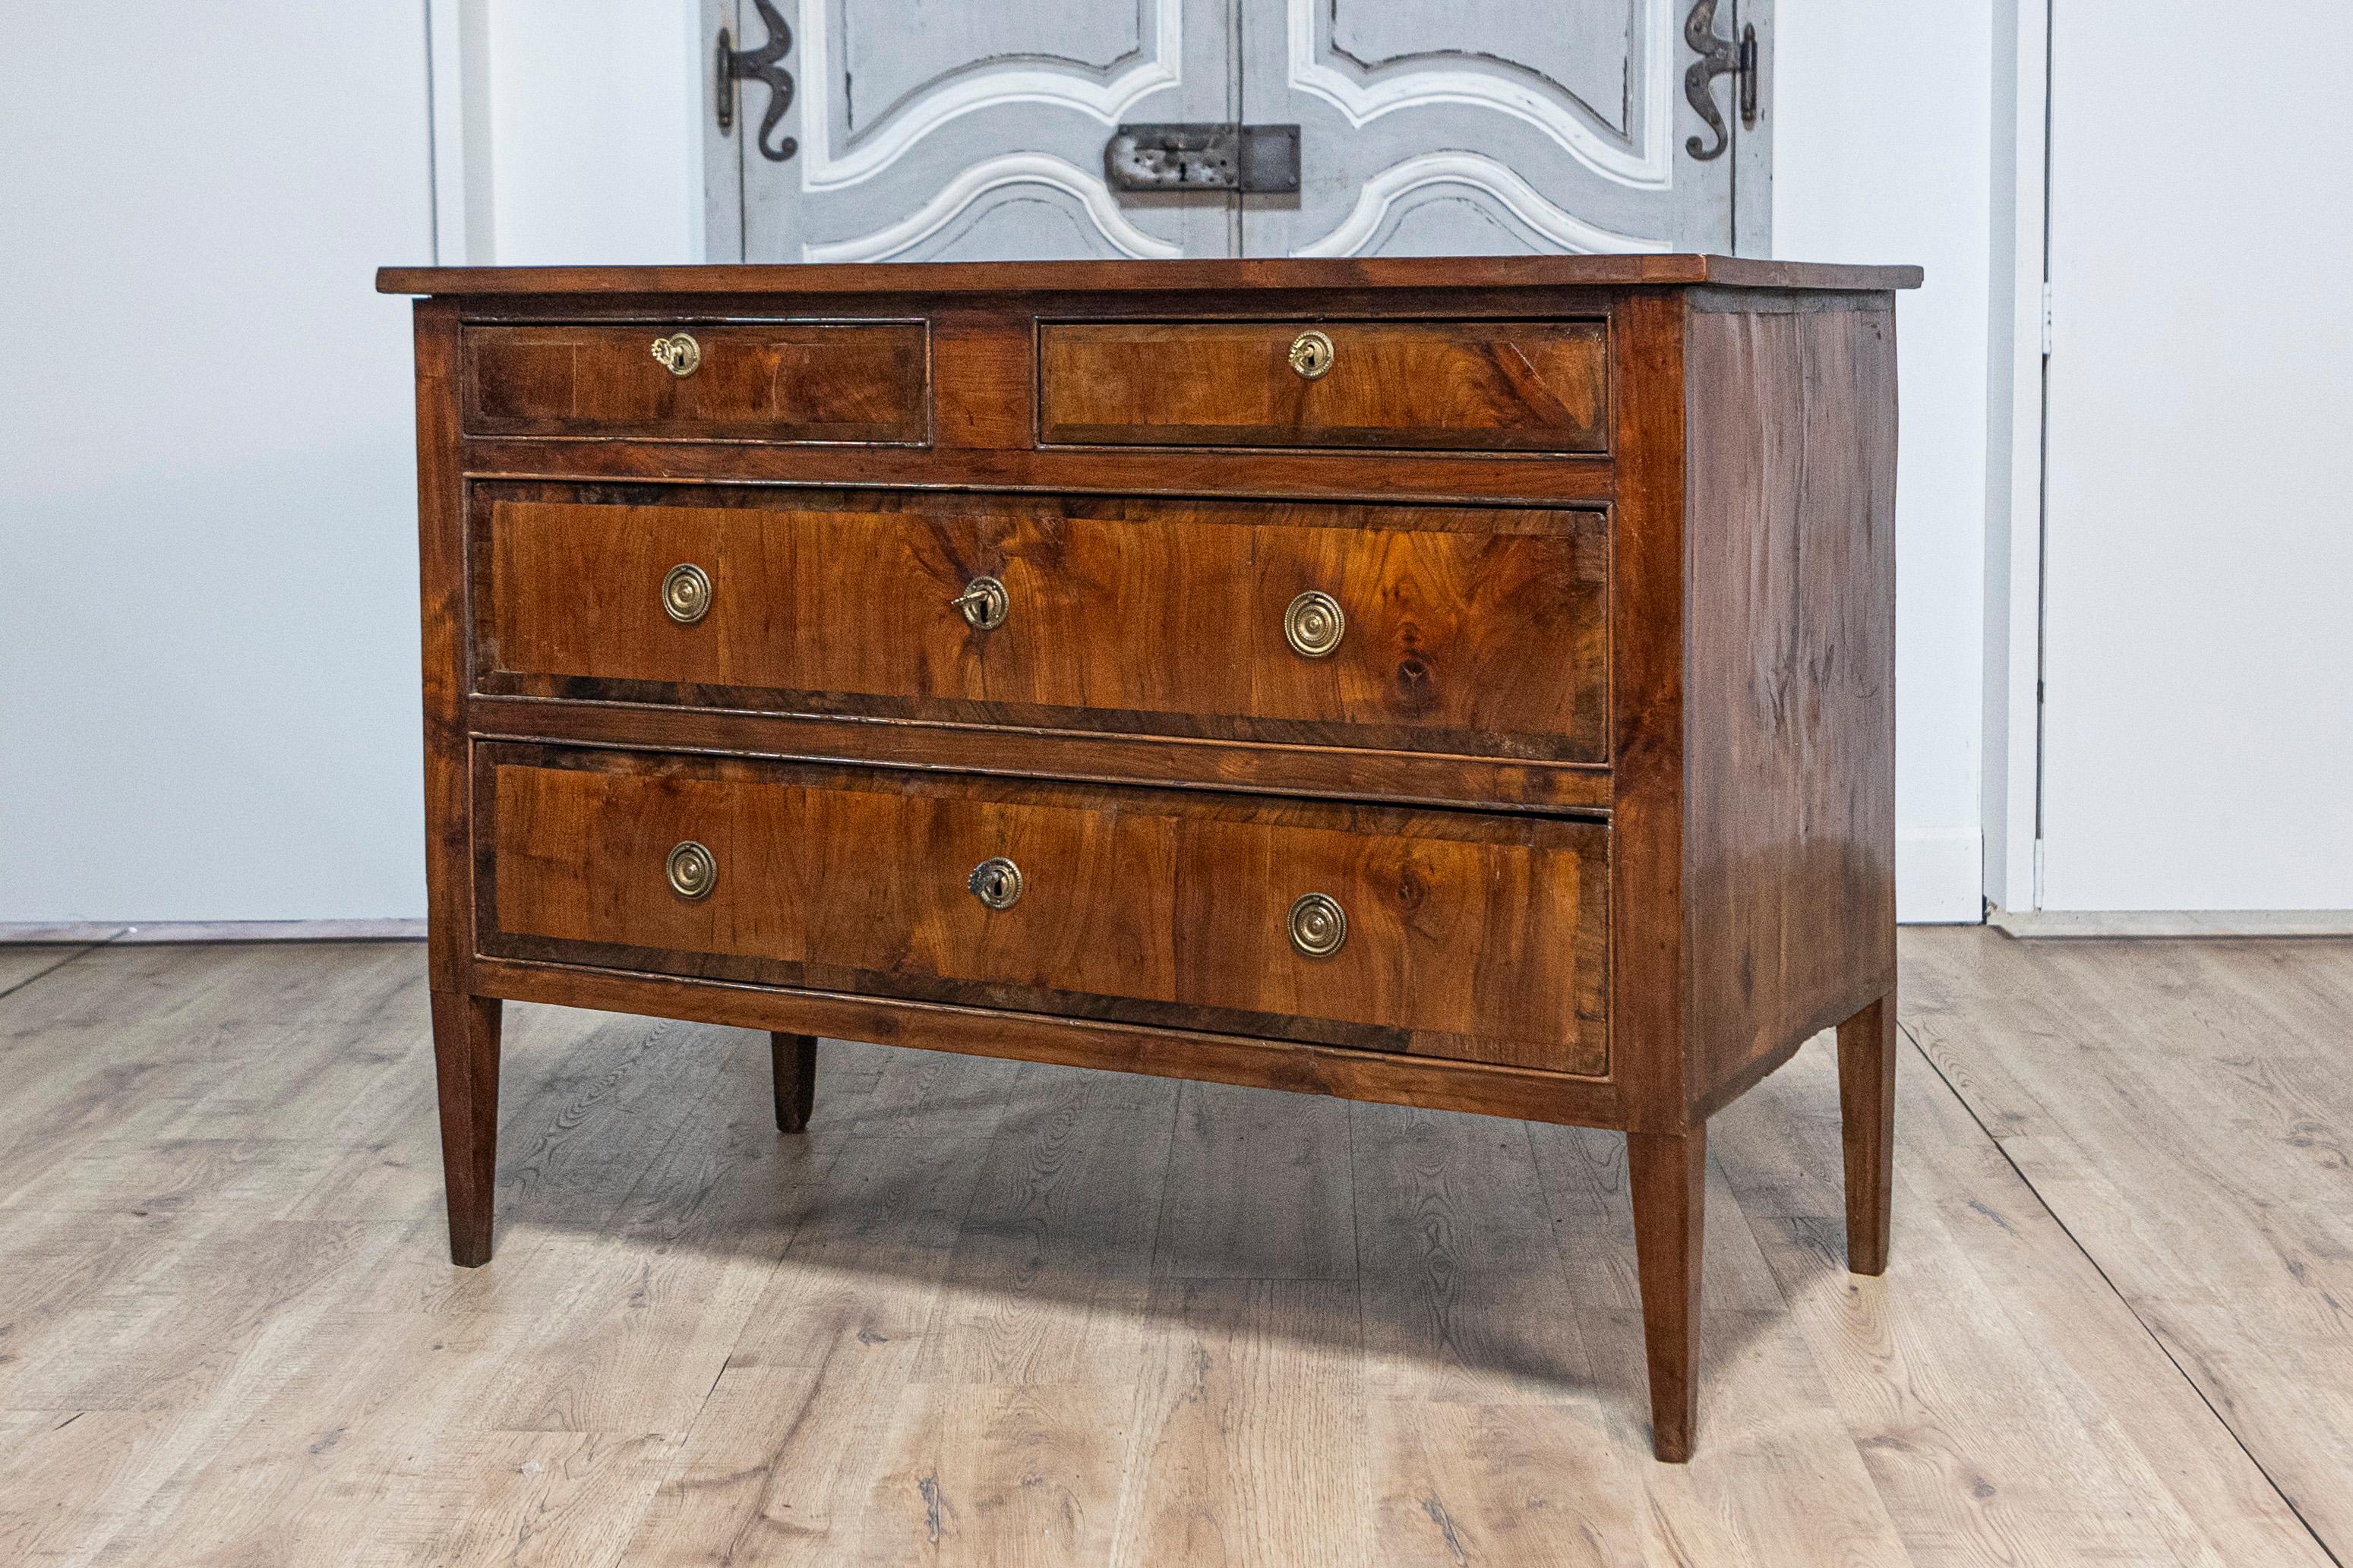 Italian Neoclassical Period 18th Century Walnut Commode with Four Drawers For Sale 10